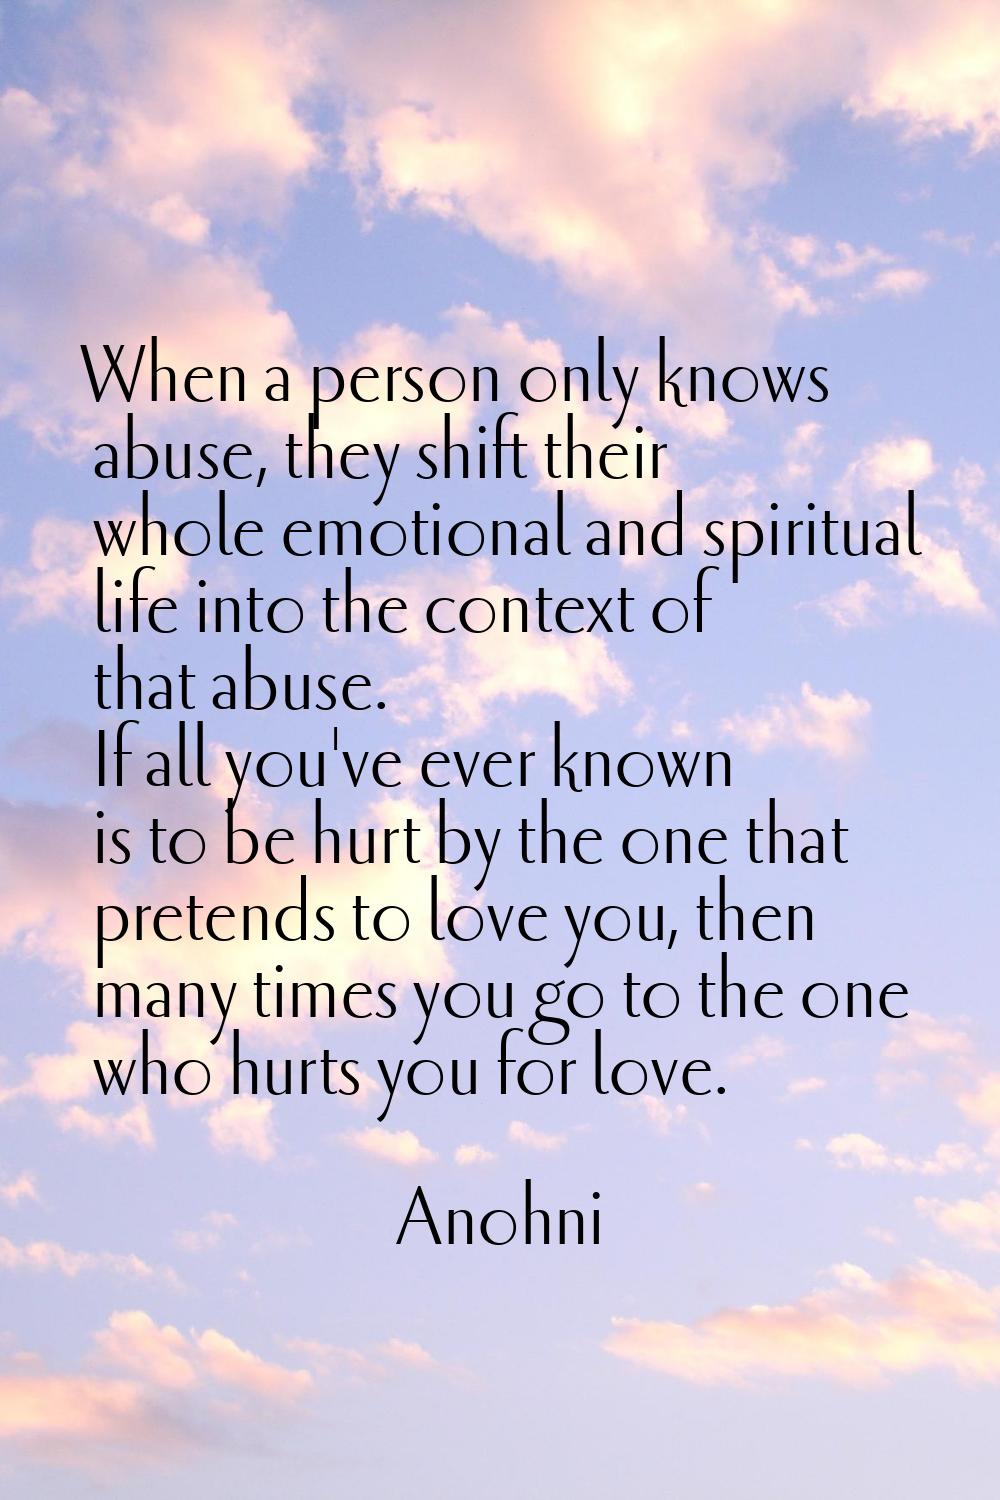 When a person only knows abuse, they shift their whole emotional and spiritual life into the contex